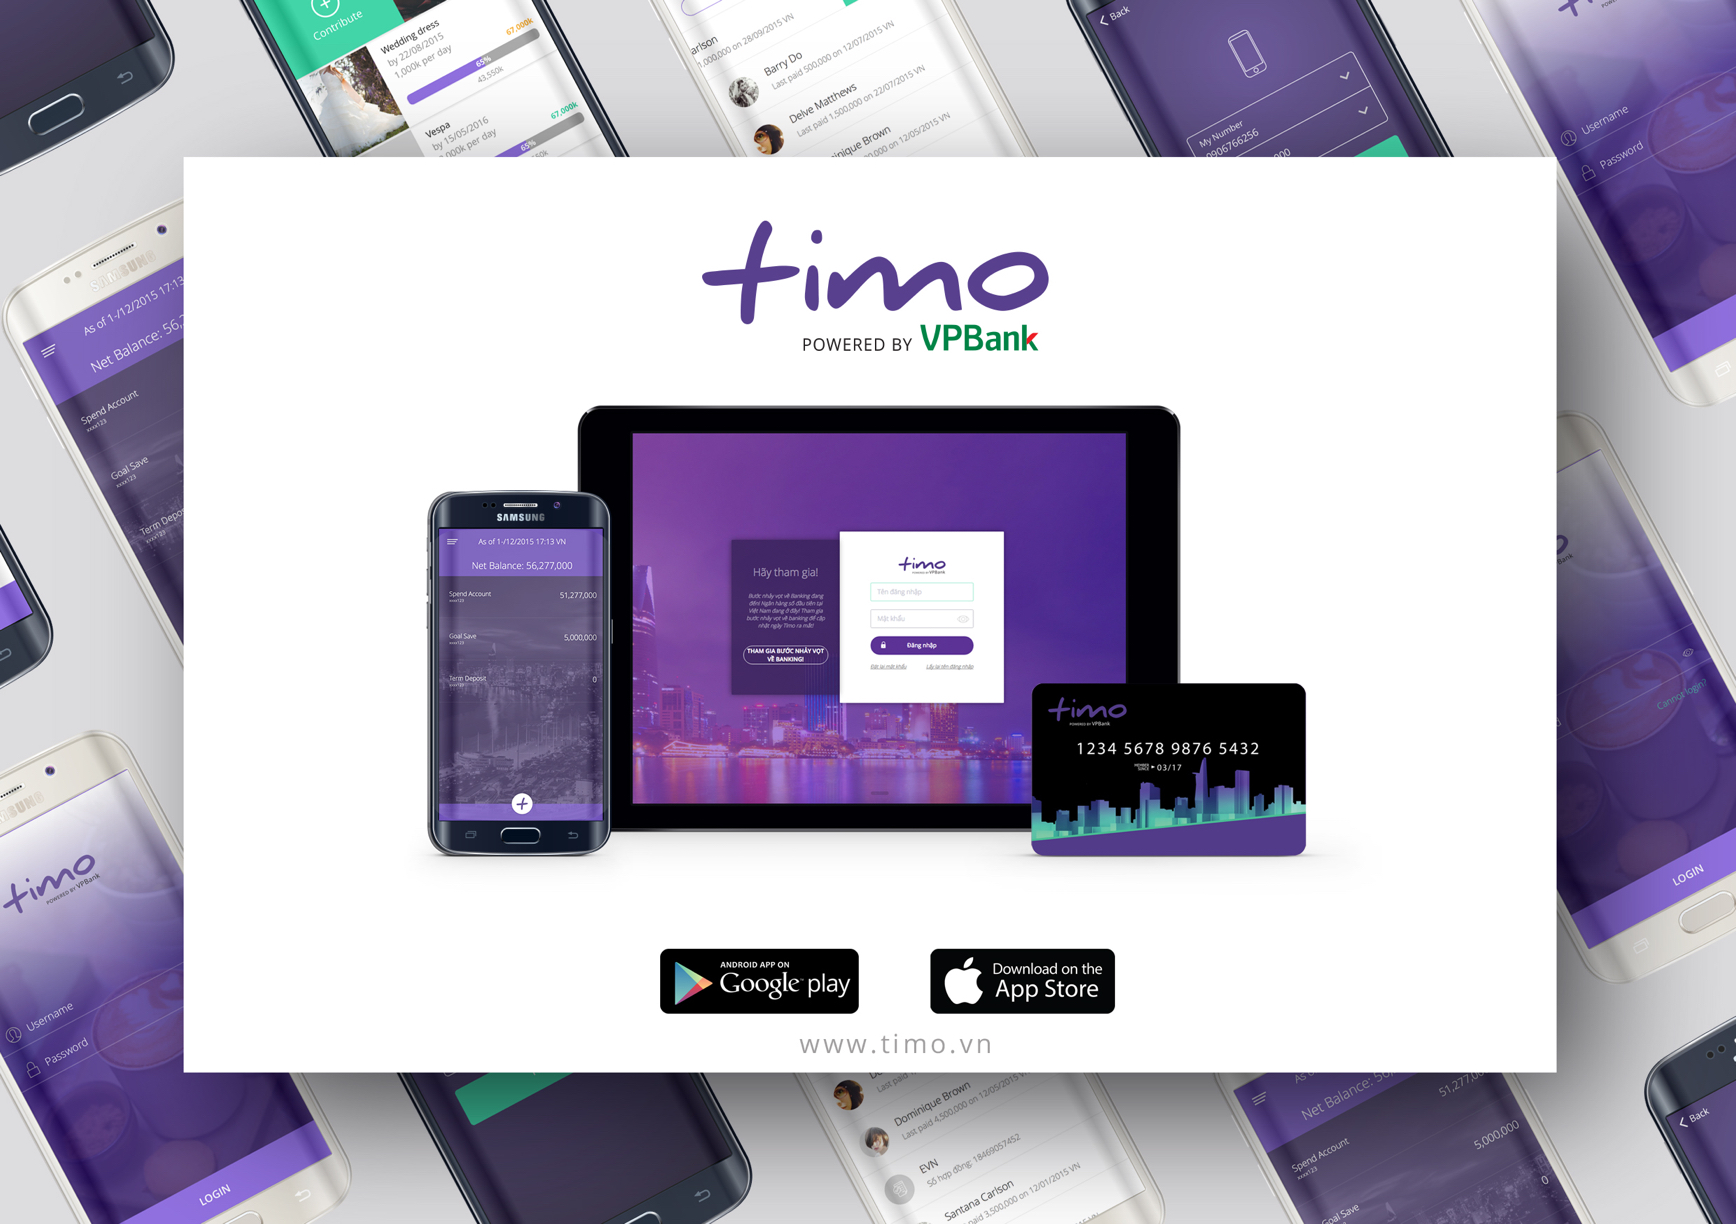 Timo – The first truly Digital Bank in Vietnam